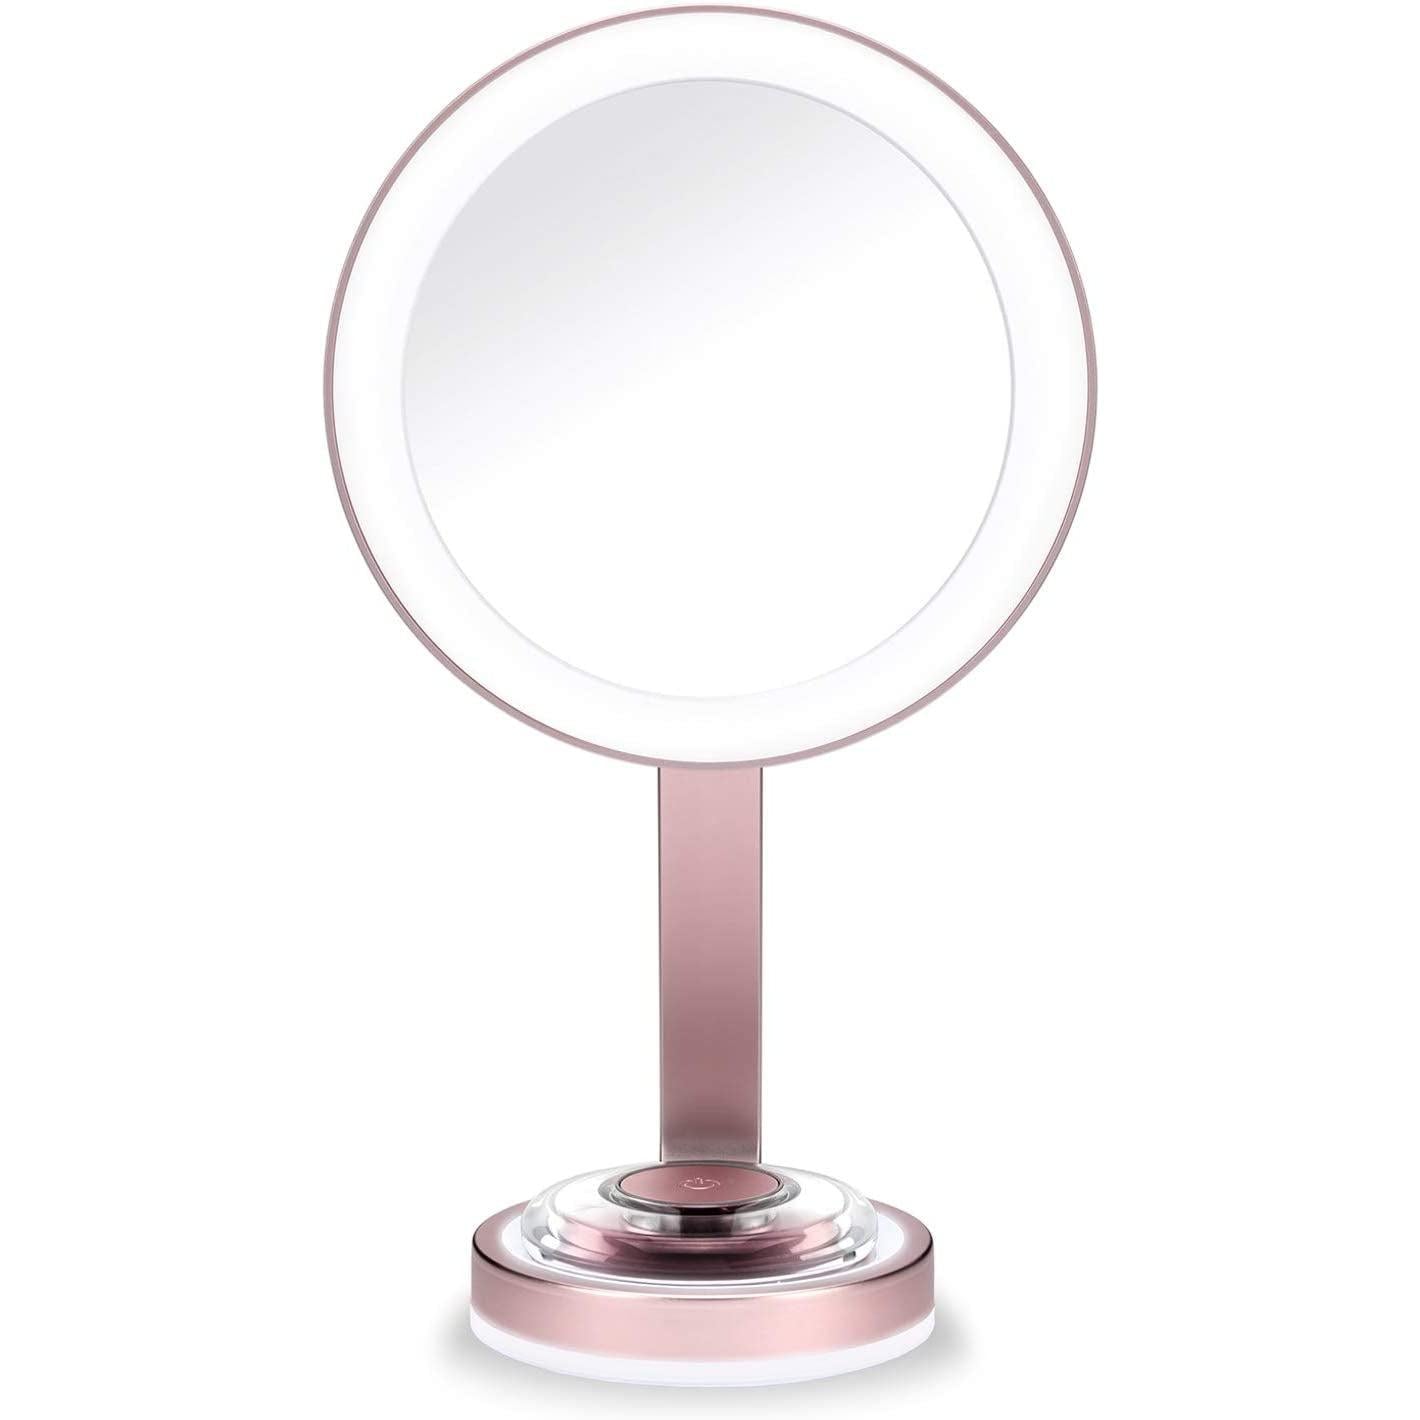 BaByliss Reflections illuminating Ultra Slim Beauty Mirror, Rose Gold - Healthxpress.ie